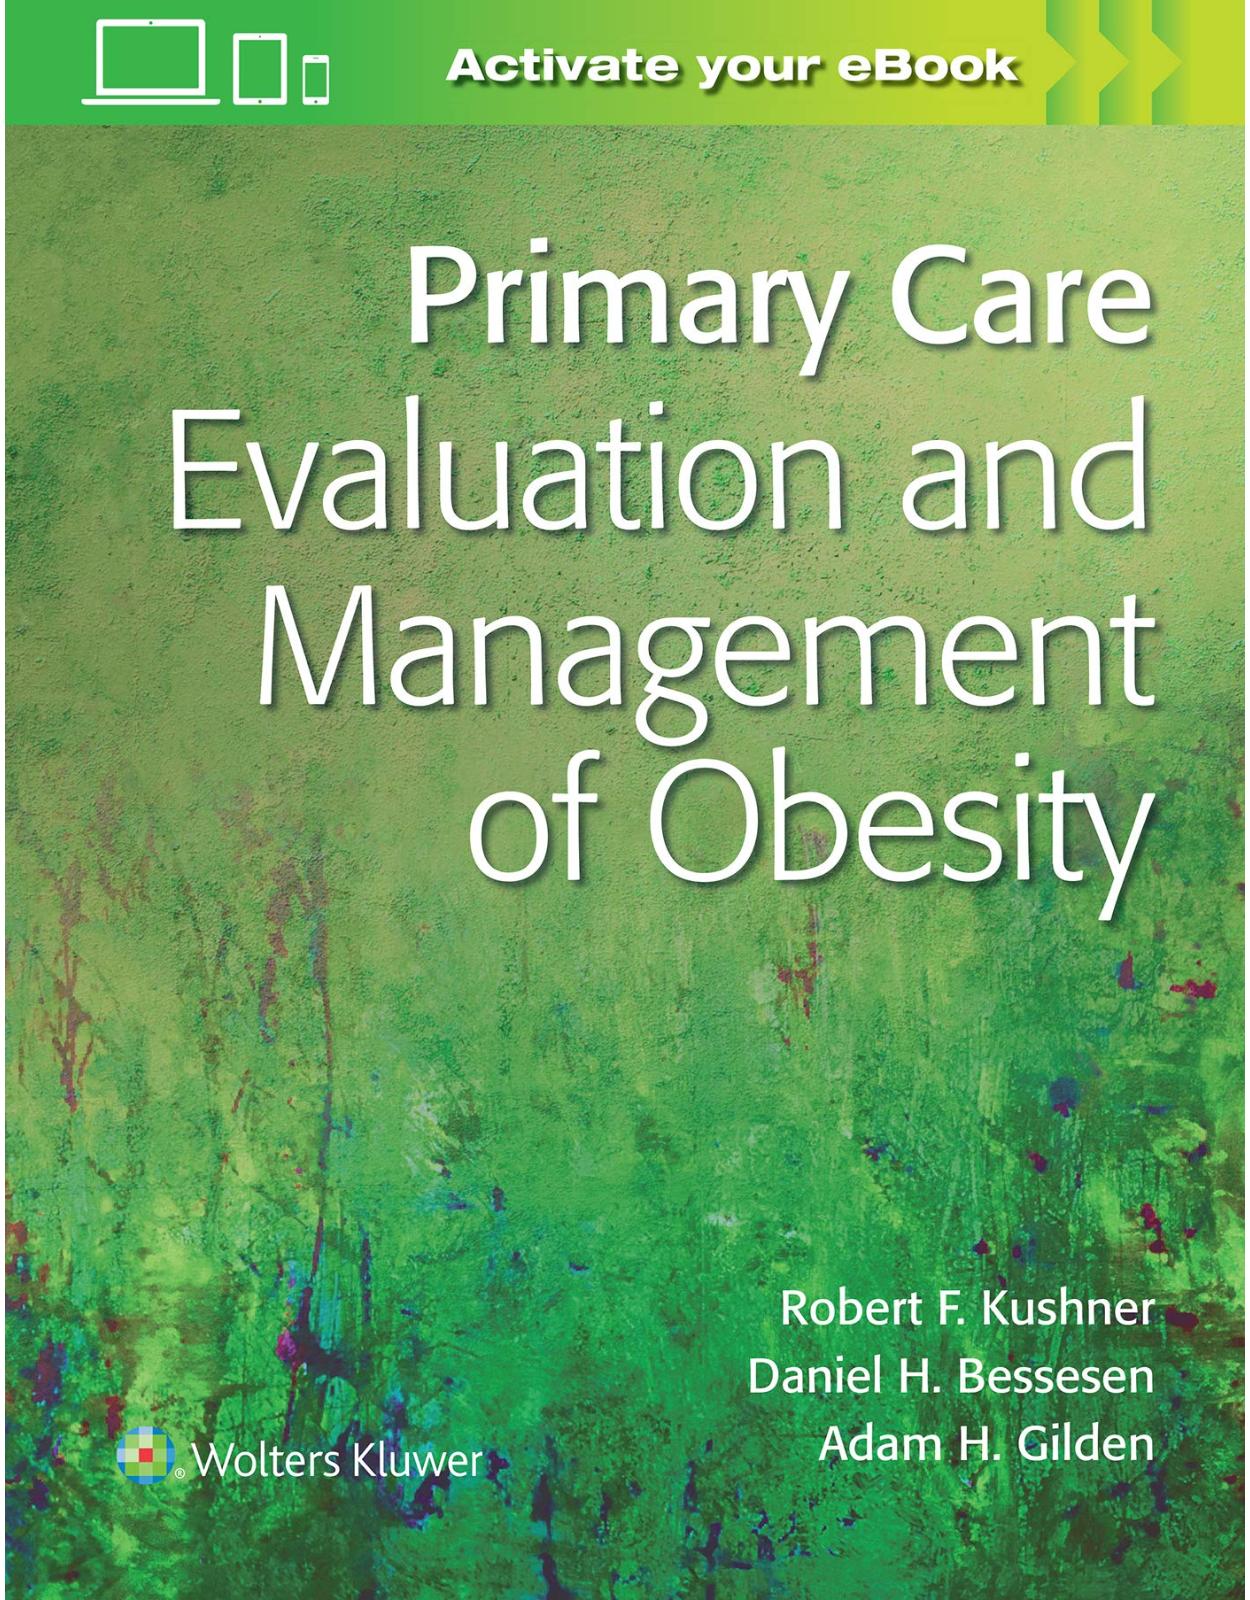 Primary Care:Evaluation and Management of Obesity